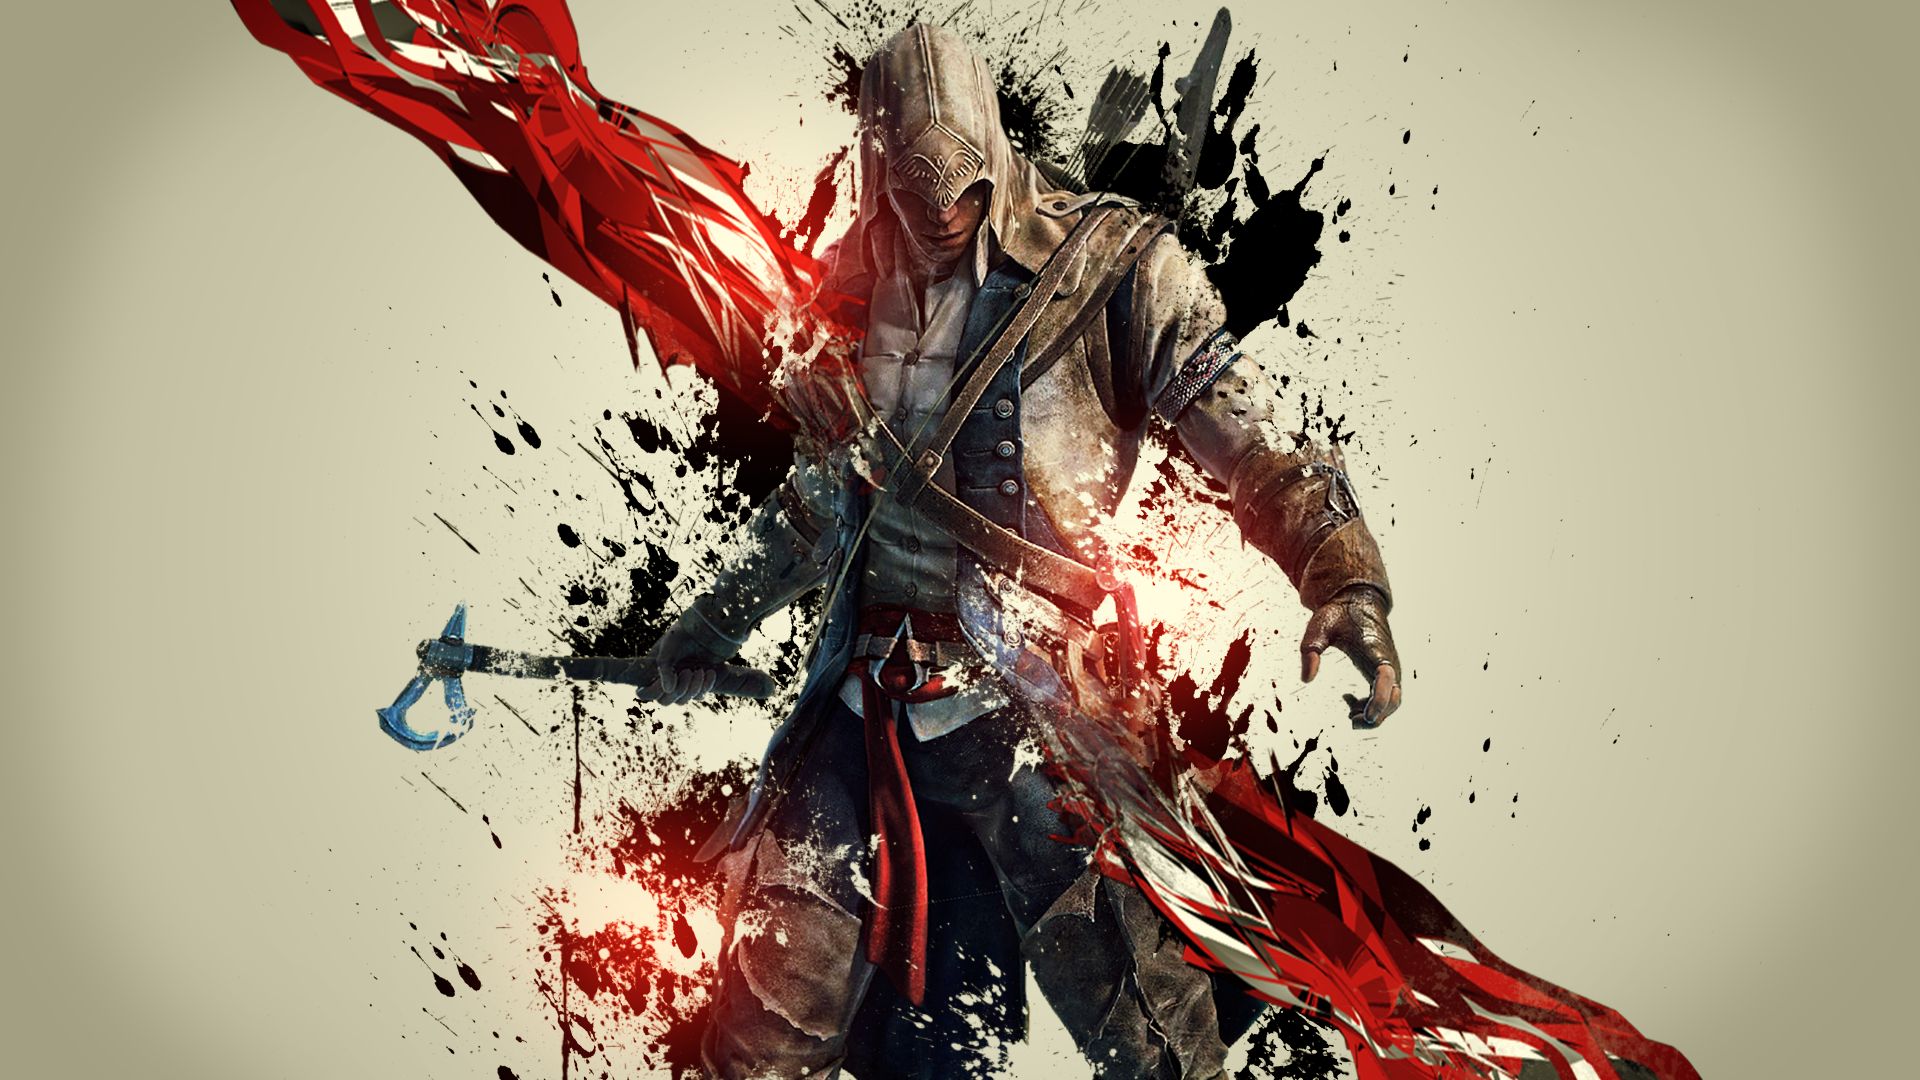 video game, warrior, connor (assassin's creed), assassin's creed, assassin's creed iii cellphone